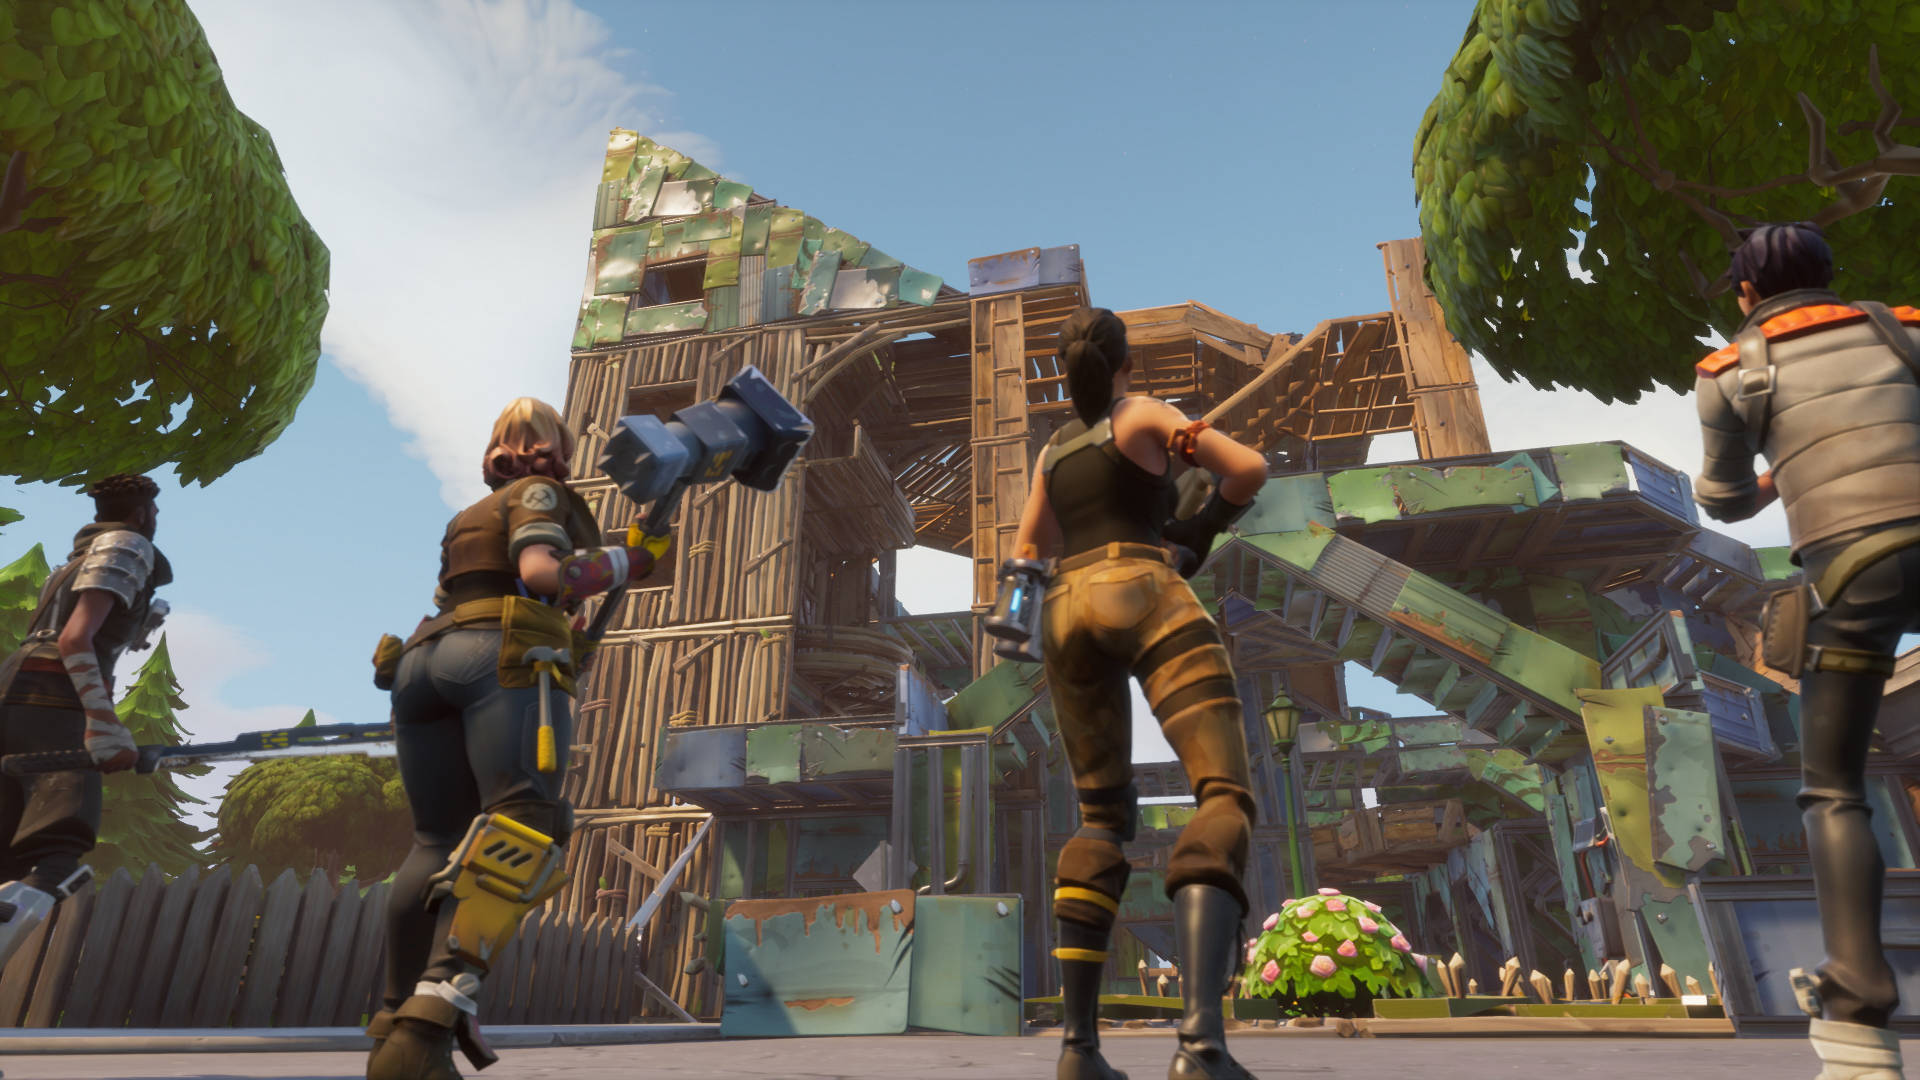 imspeedygonzales has created a practice course for building and editing in fortnite - fortnite training map code